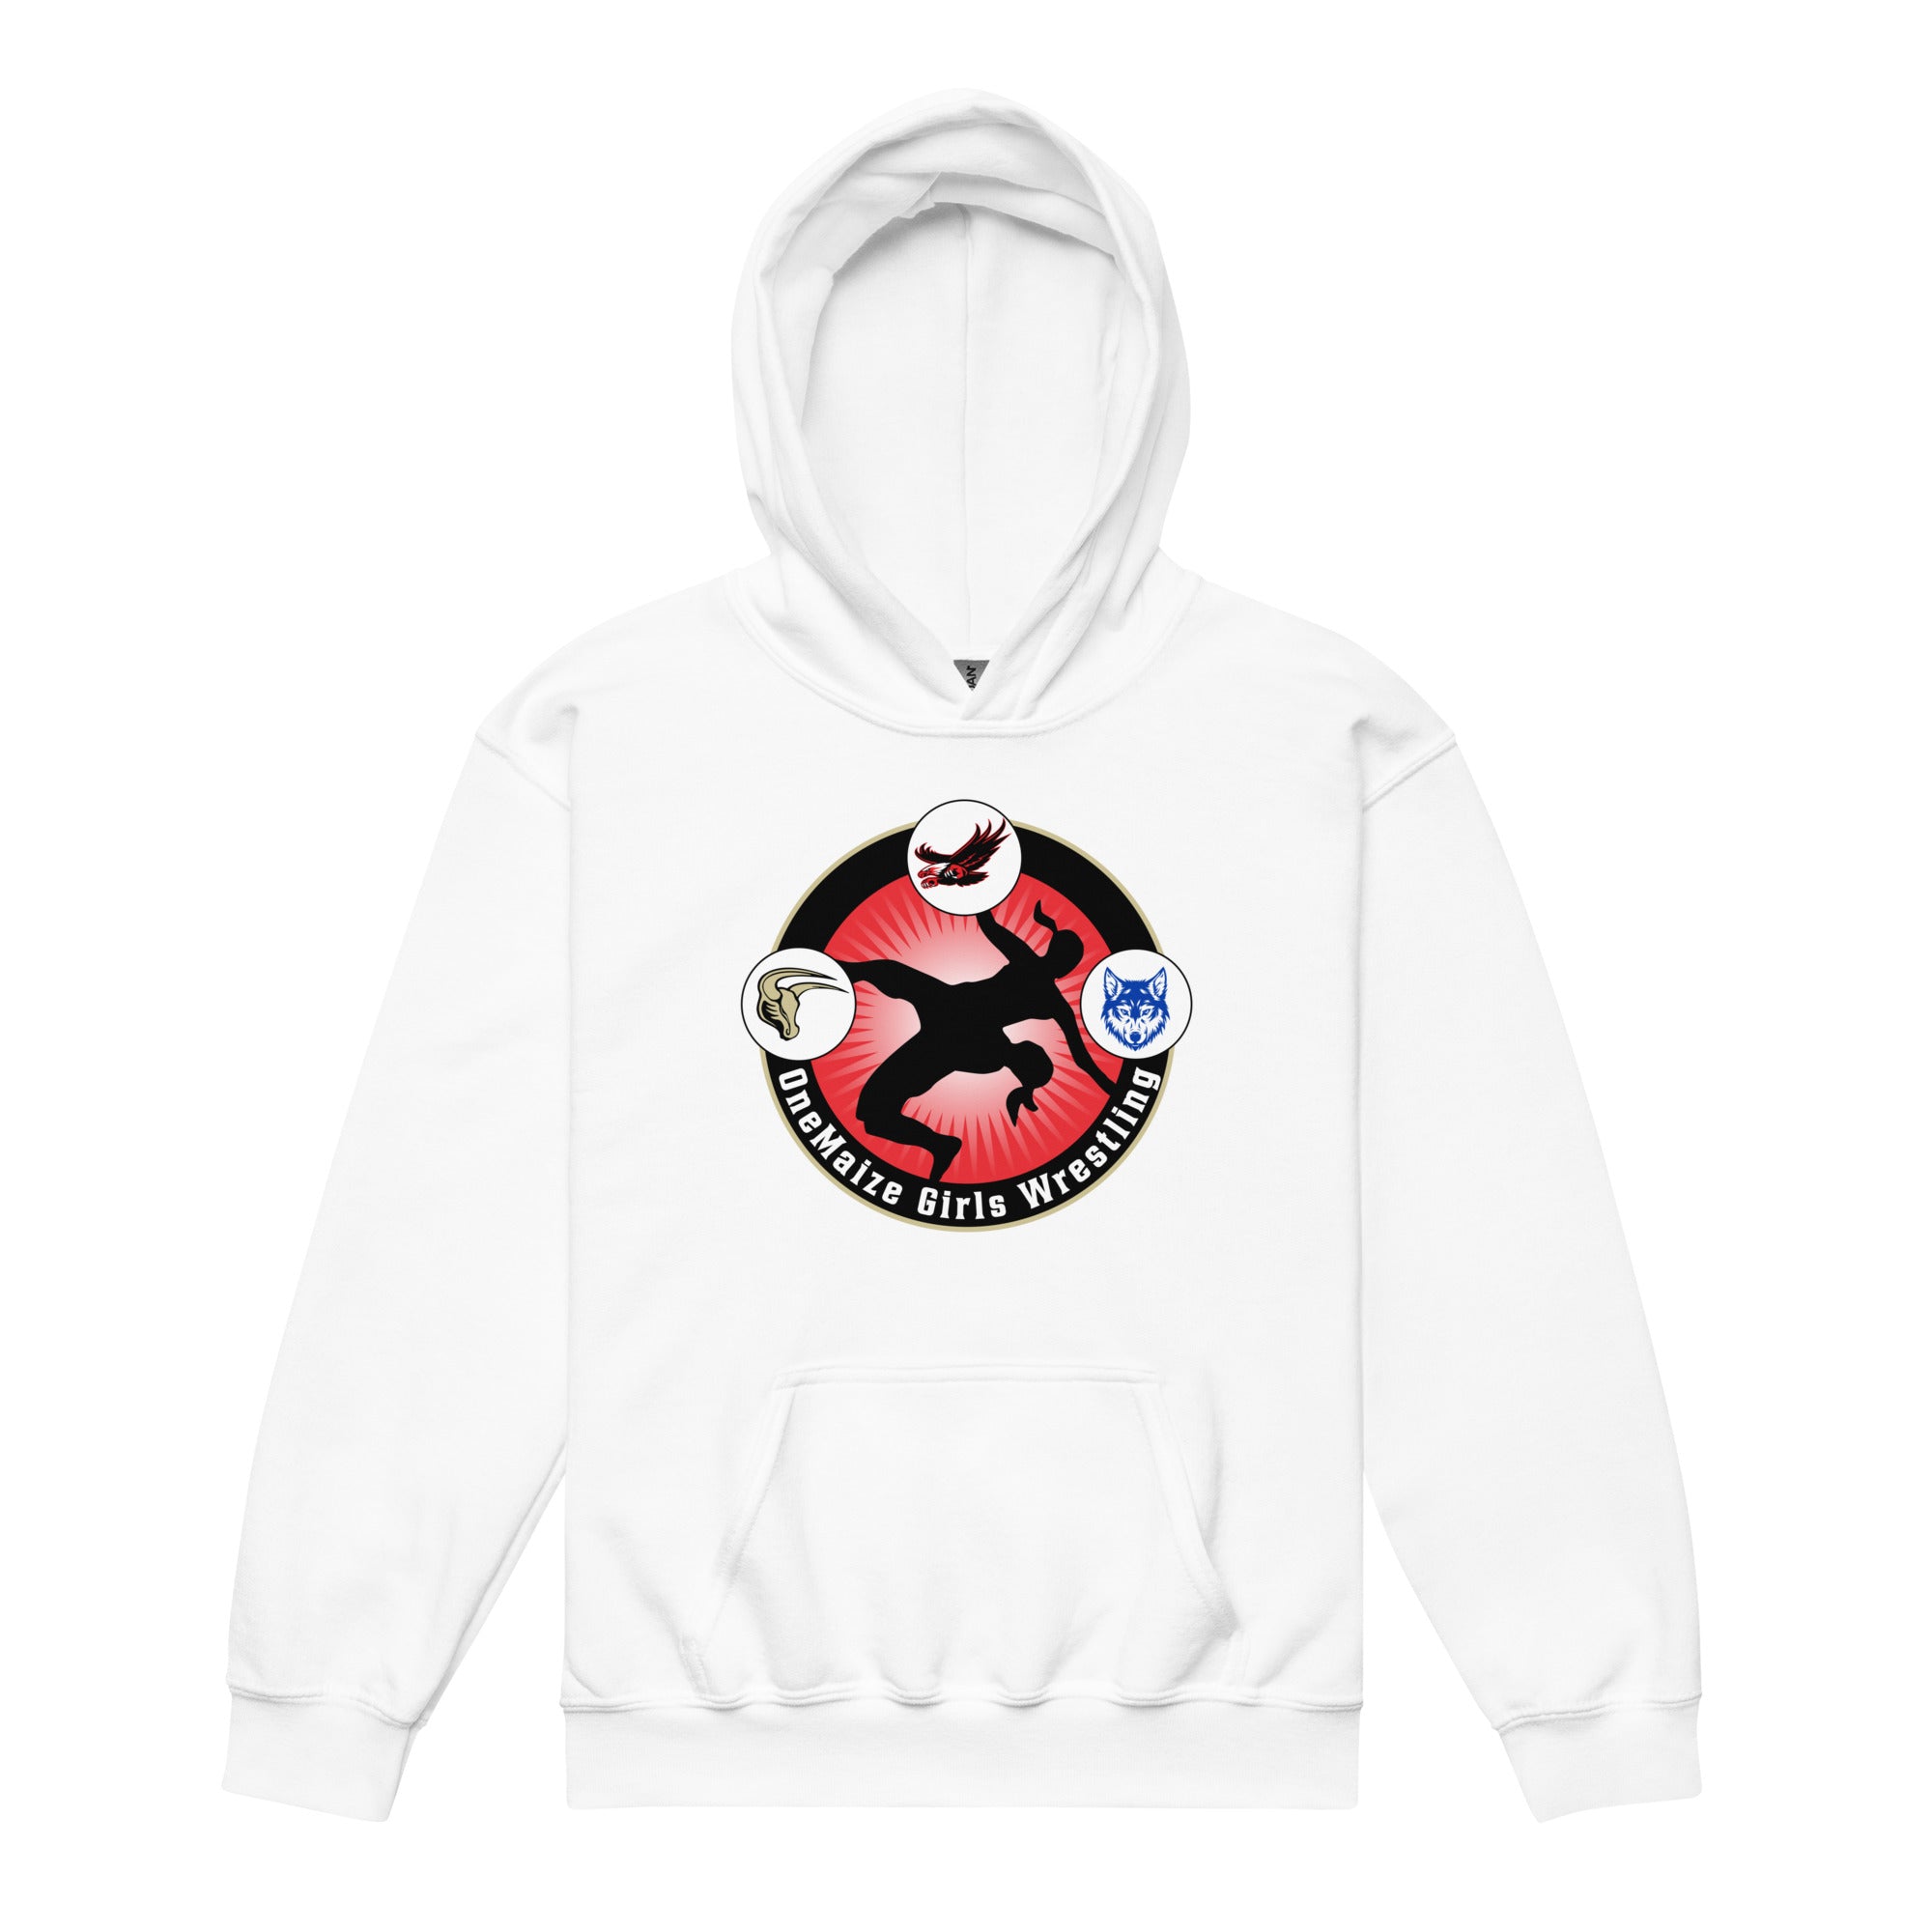 OneMaize Girls Wrestling Youth heavy blend hoodie